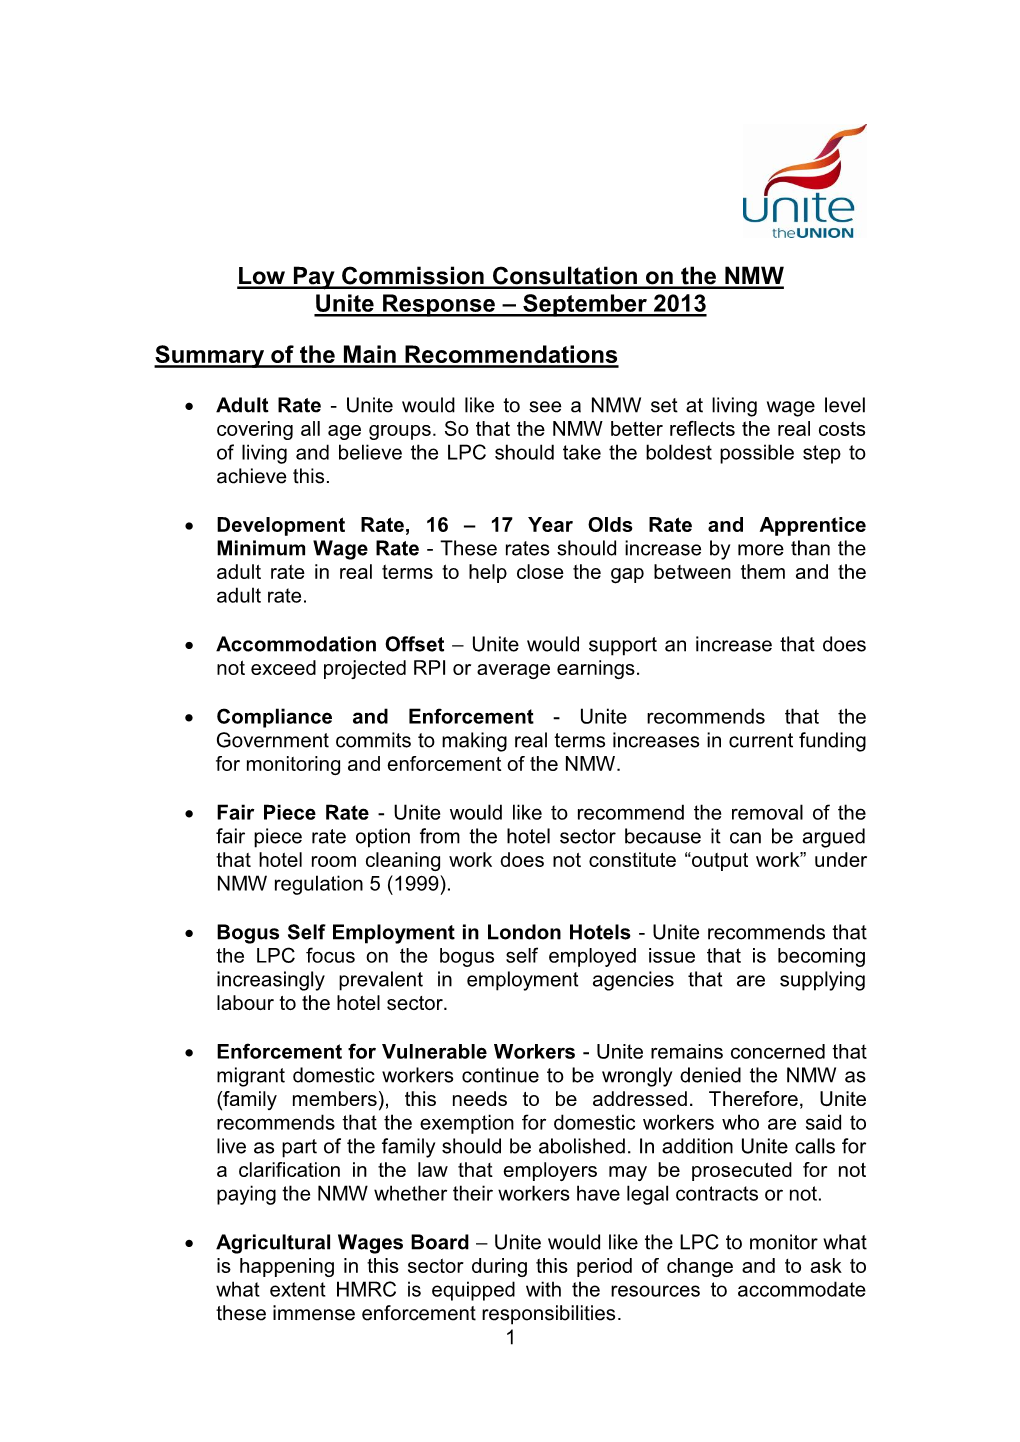 Low Pay Commission Consultation on the NMW Unite Response – September 2013 Summary of the Main Recommendations